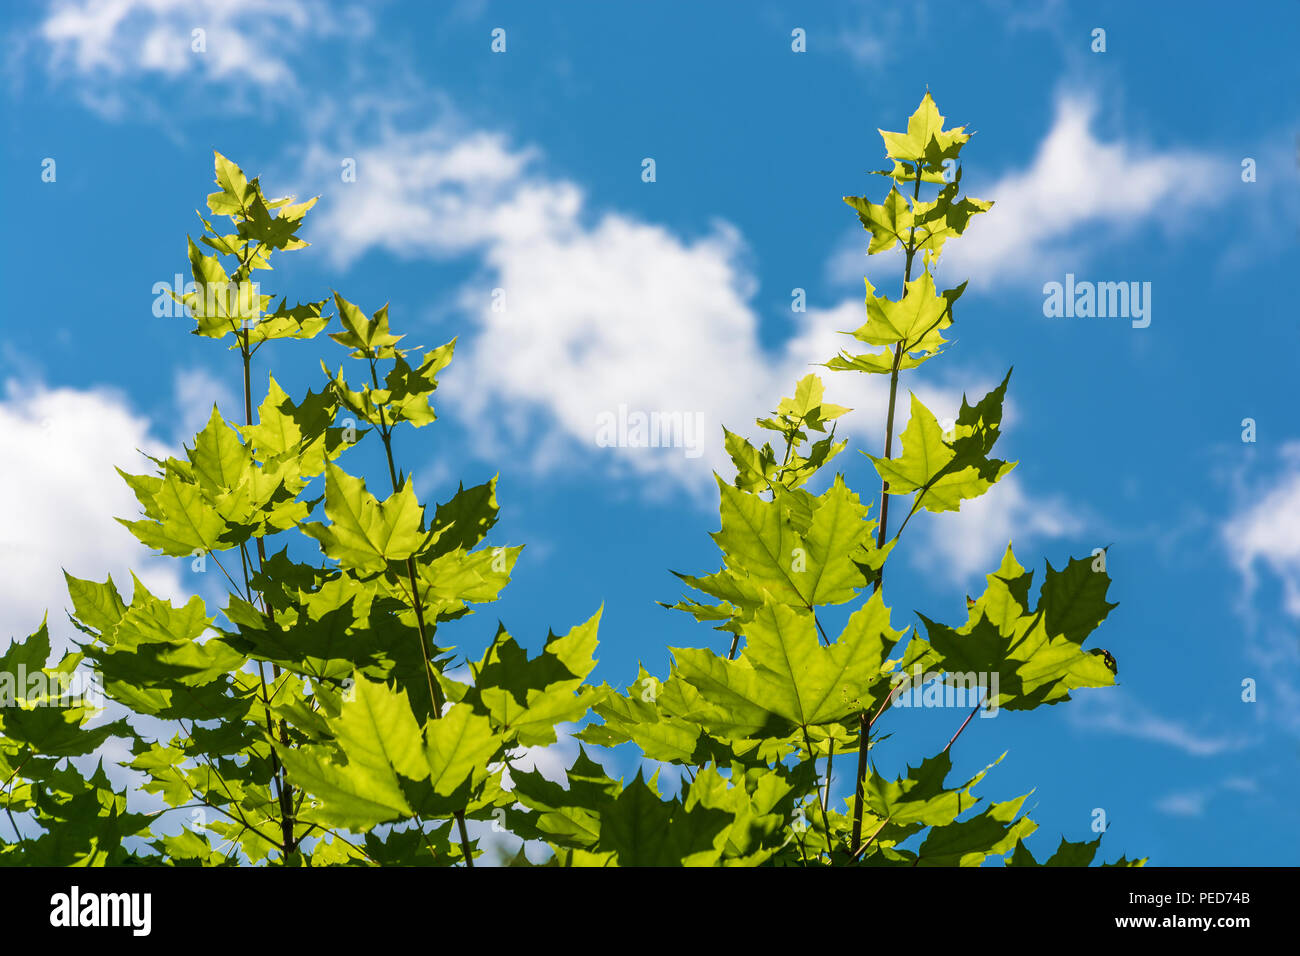 Maple leaves in a contoured light against a blue cloudy sky. Stock Photo